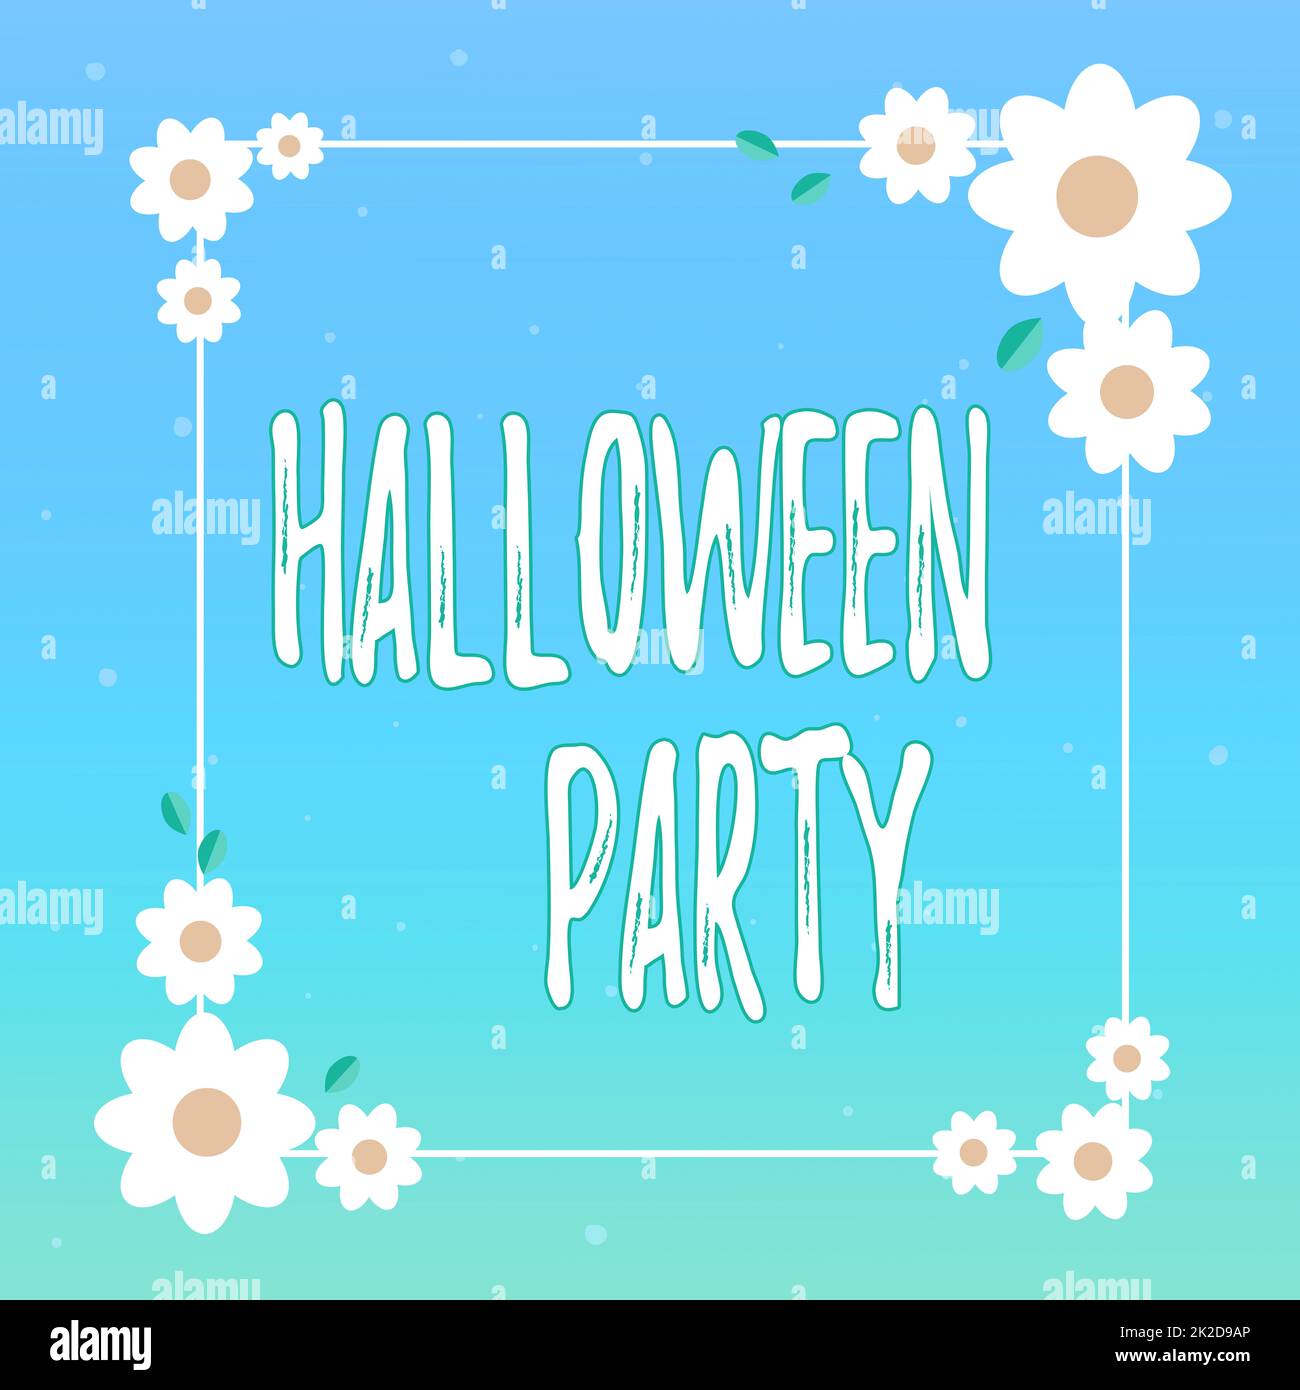 Text sign showing Halloween Party. Business idea eve of the Western Christian feast of All Hallows Day Blank Frame Decorated With Abstract Modernized Forms Flowers And Foliage. Stock Photo